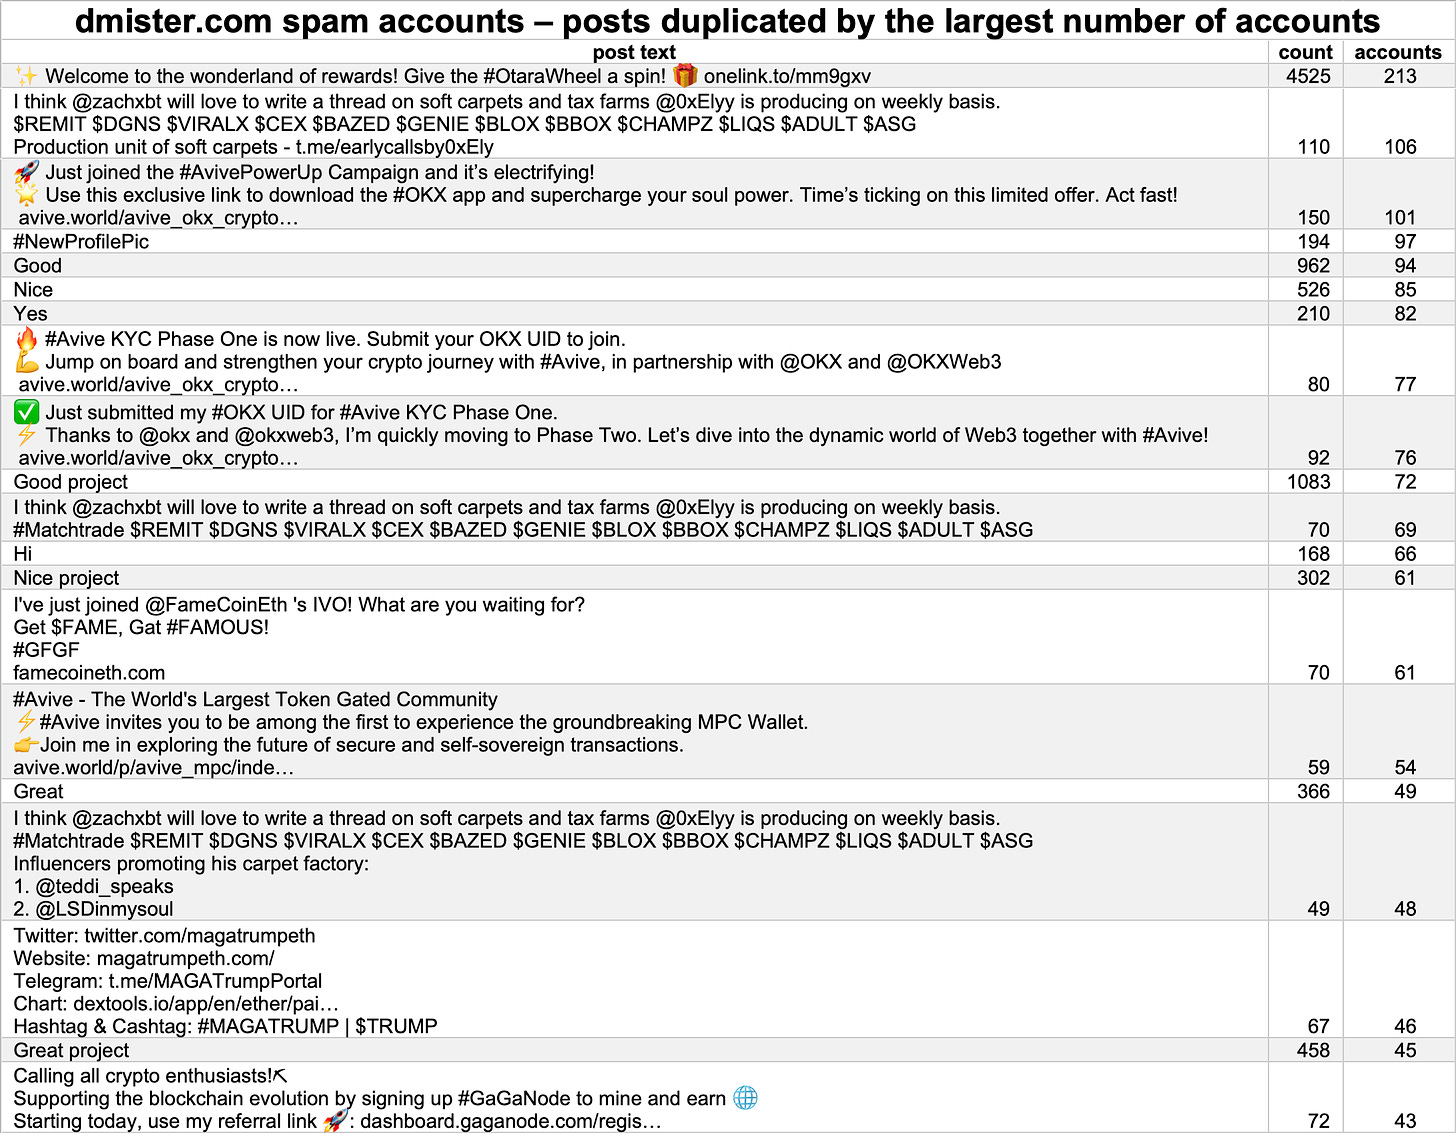 table of repeated posts from the spam accounts